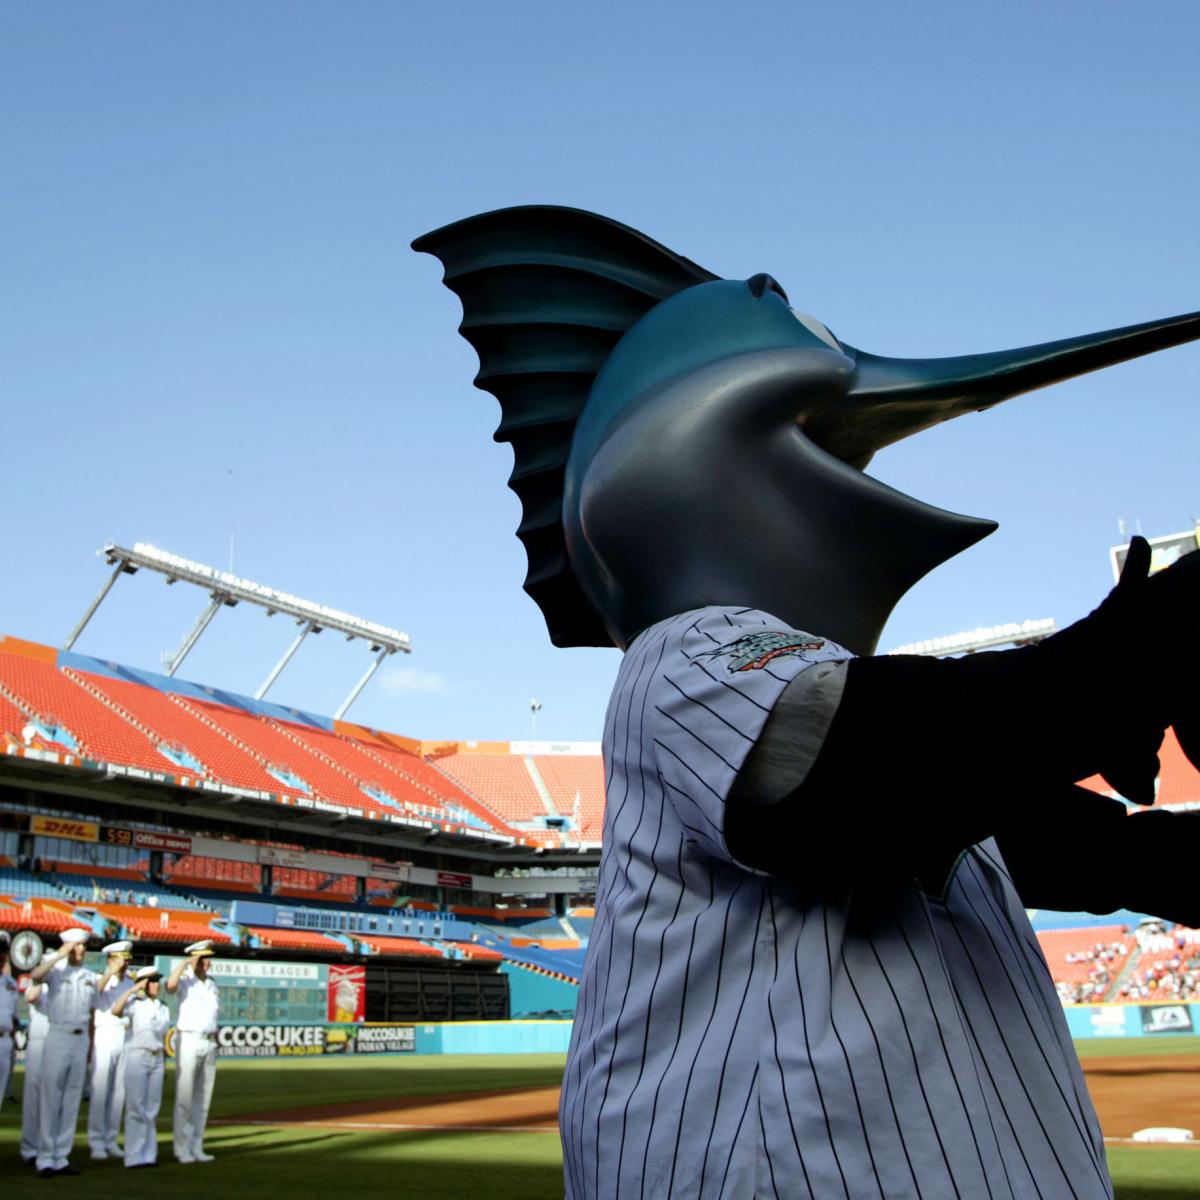 Miami Marlins officially unveil their new name and look